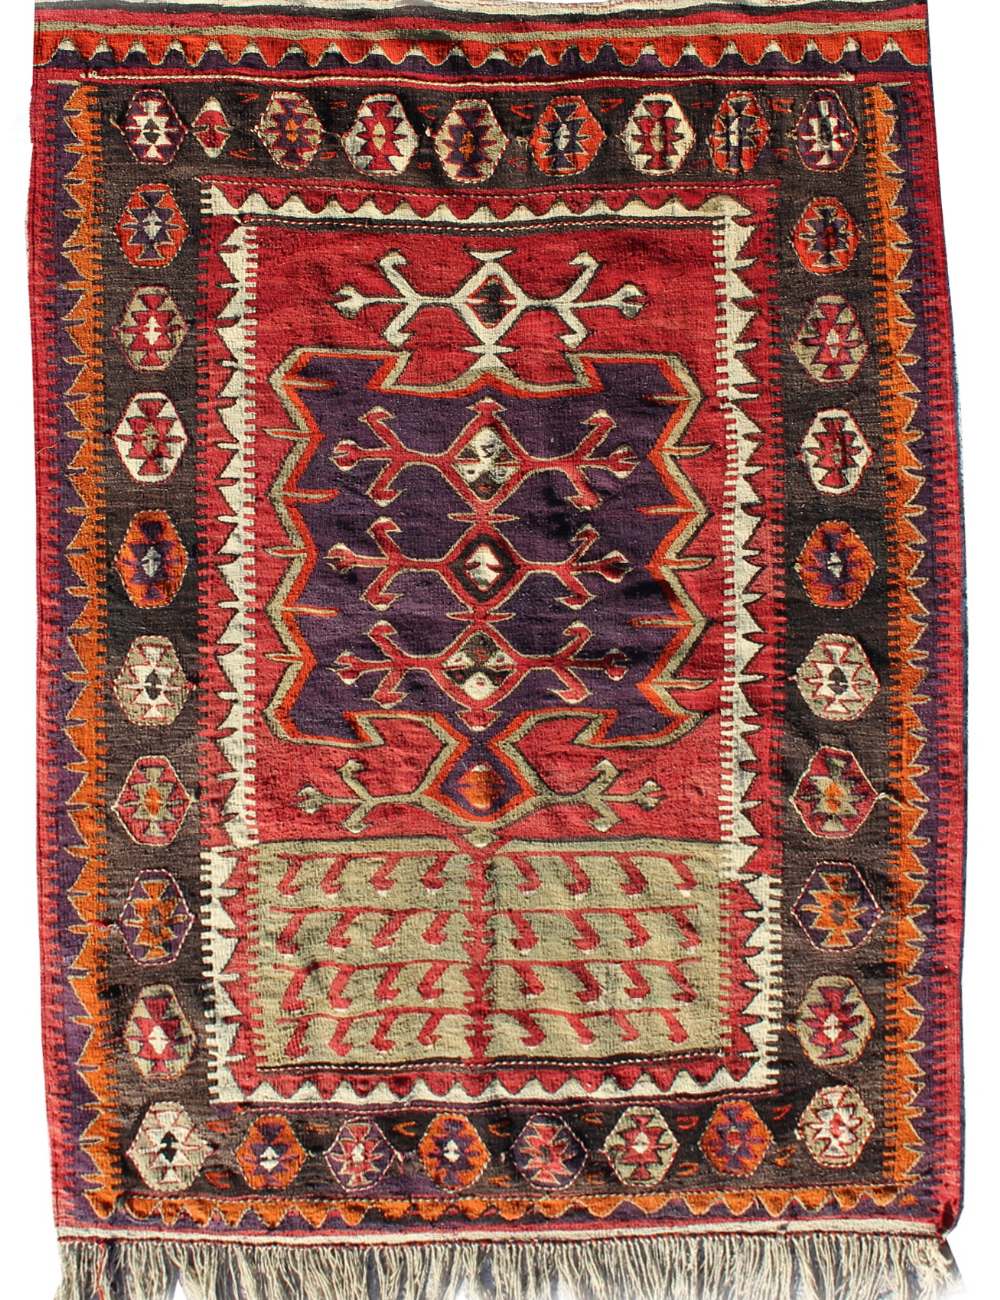 Property of a gentleman - a mid 20th century Turkish kelim, 81 by 57ins. (206 by 145cms.) (see